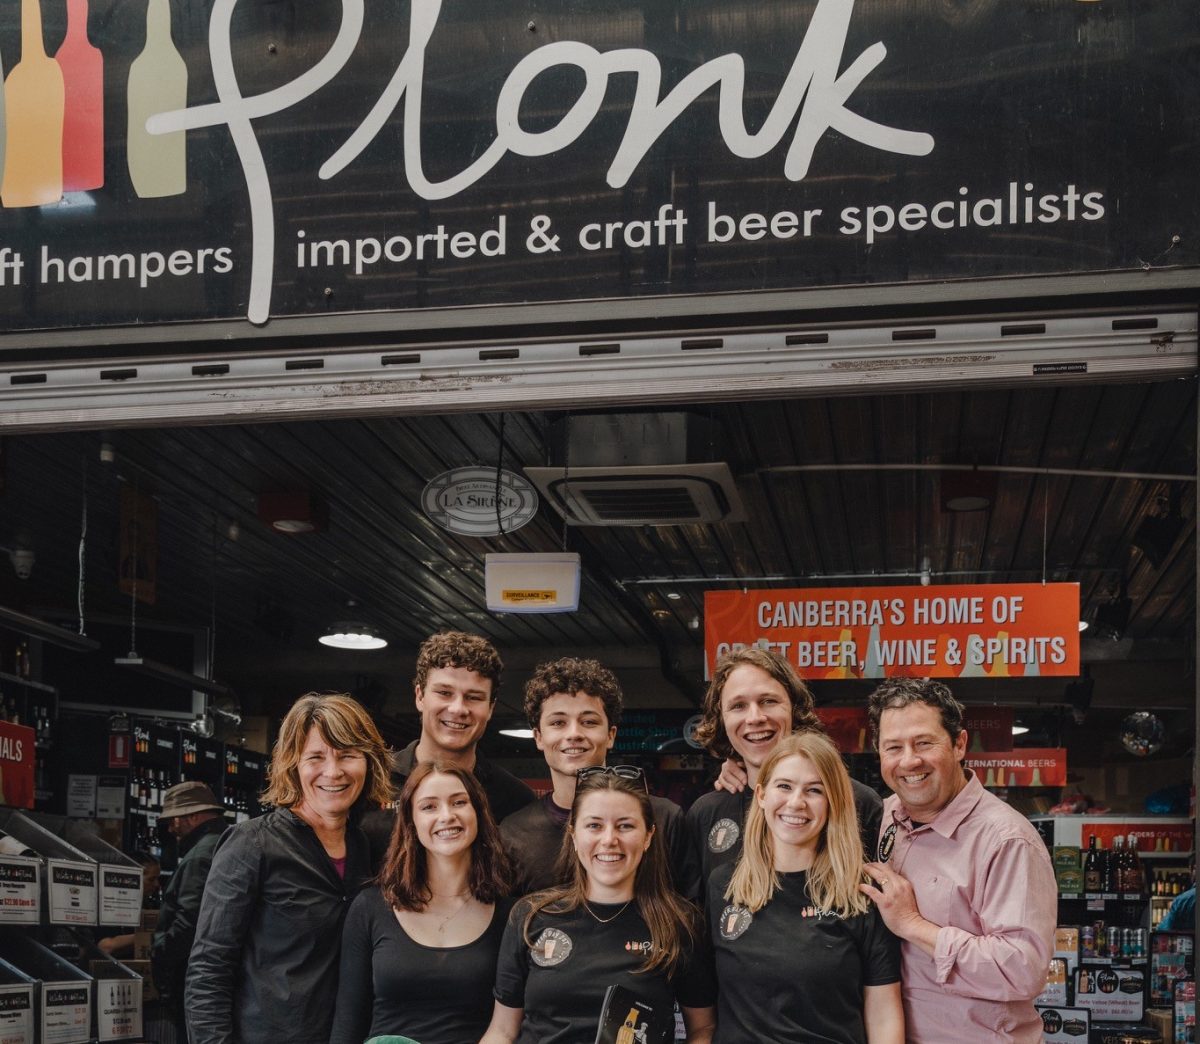 Group of people in Plonk beer and wine shop